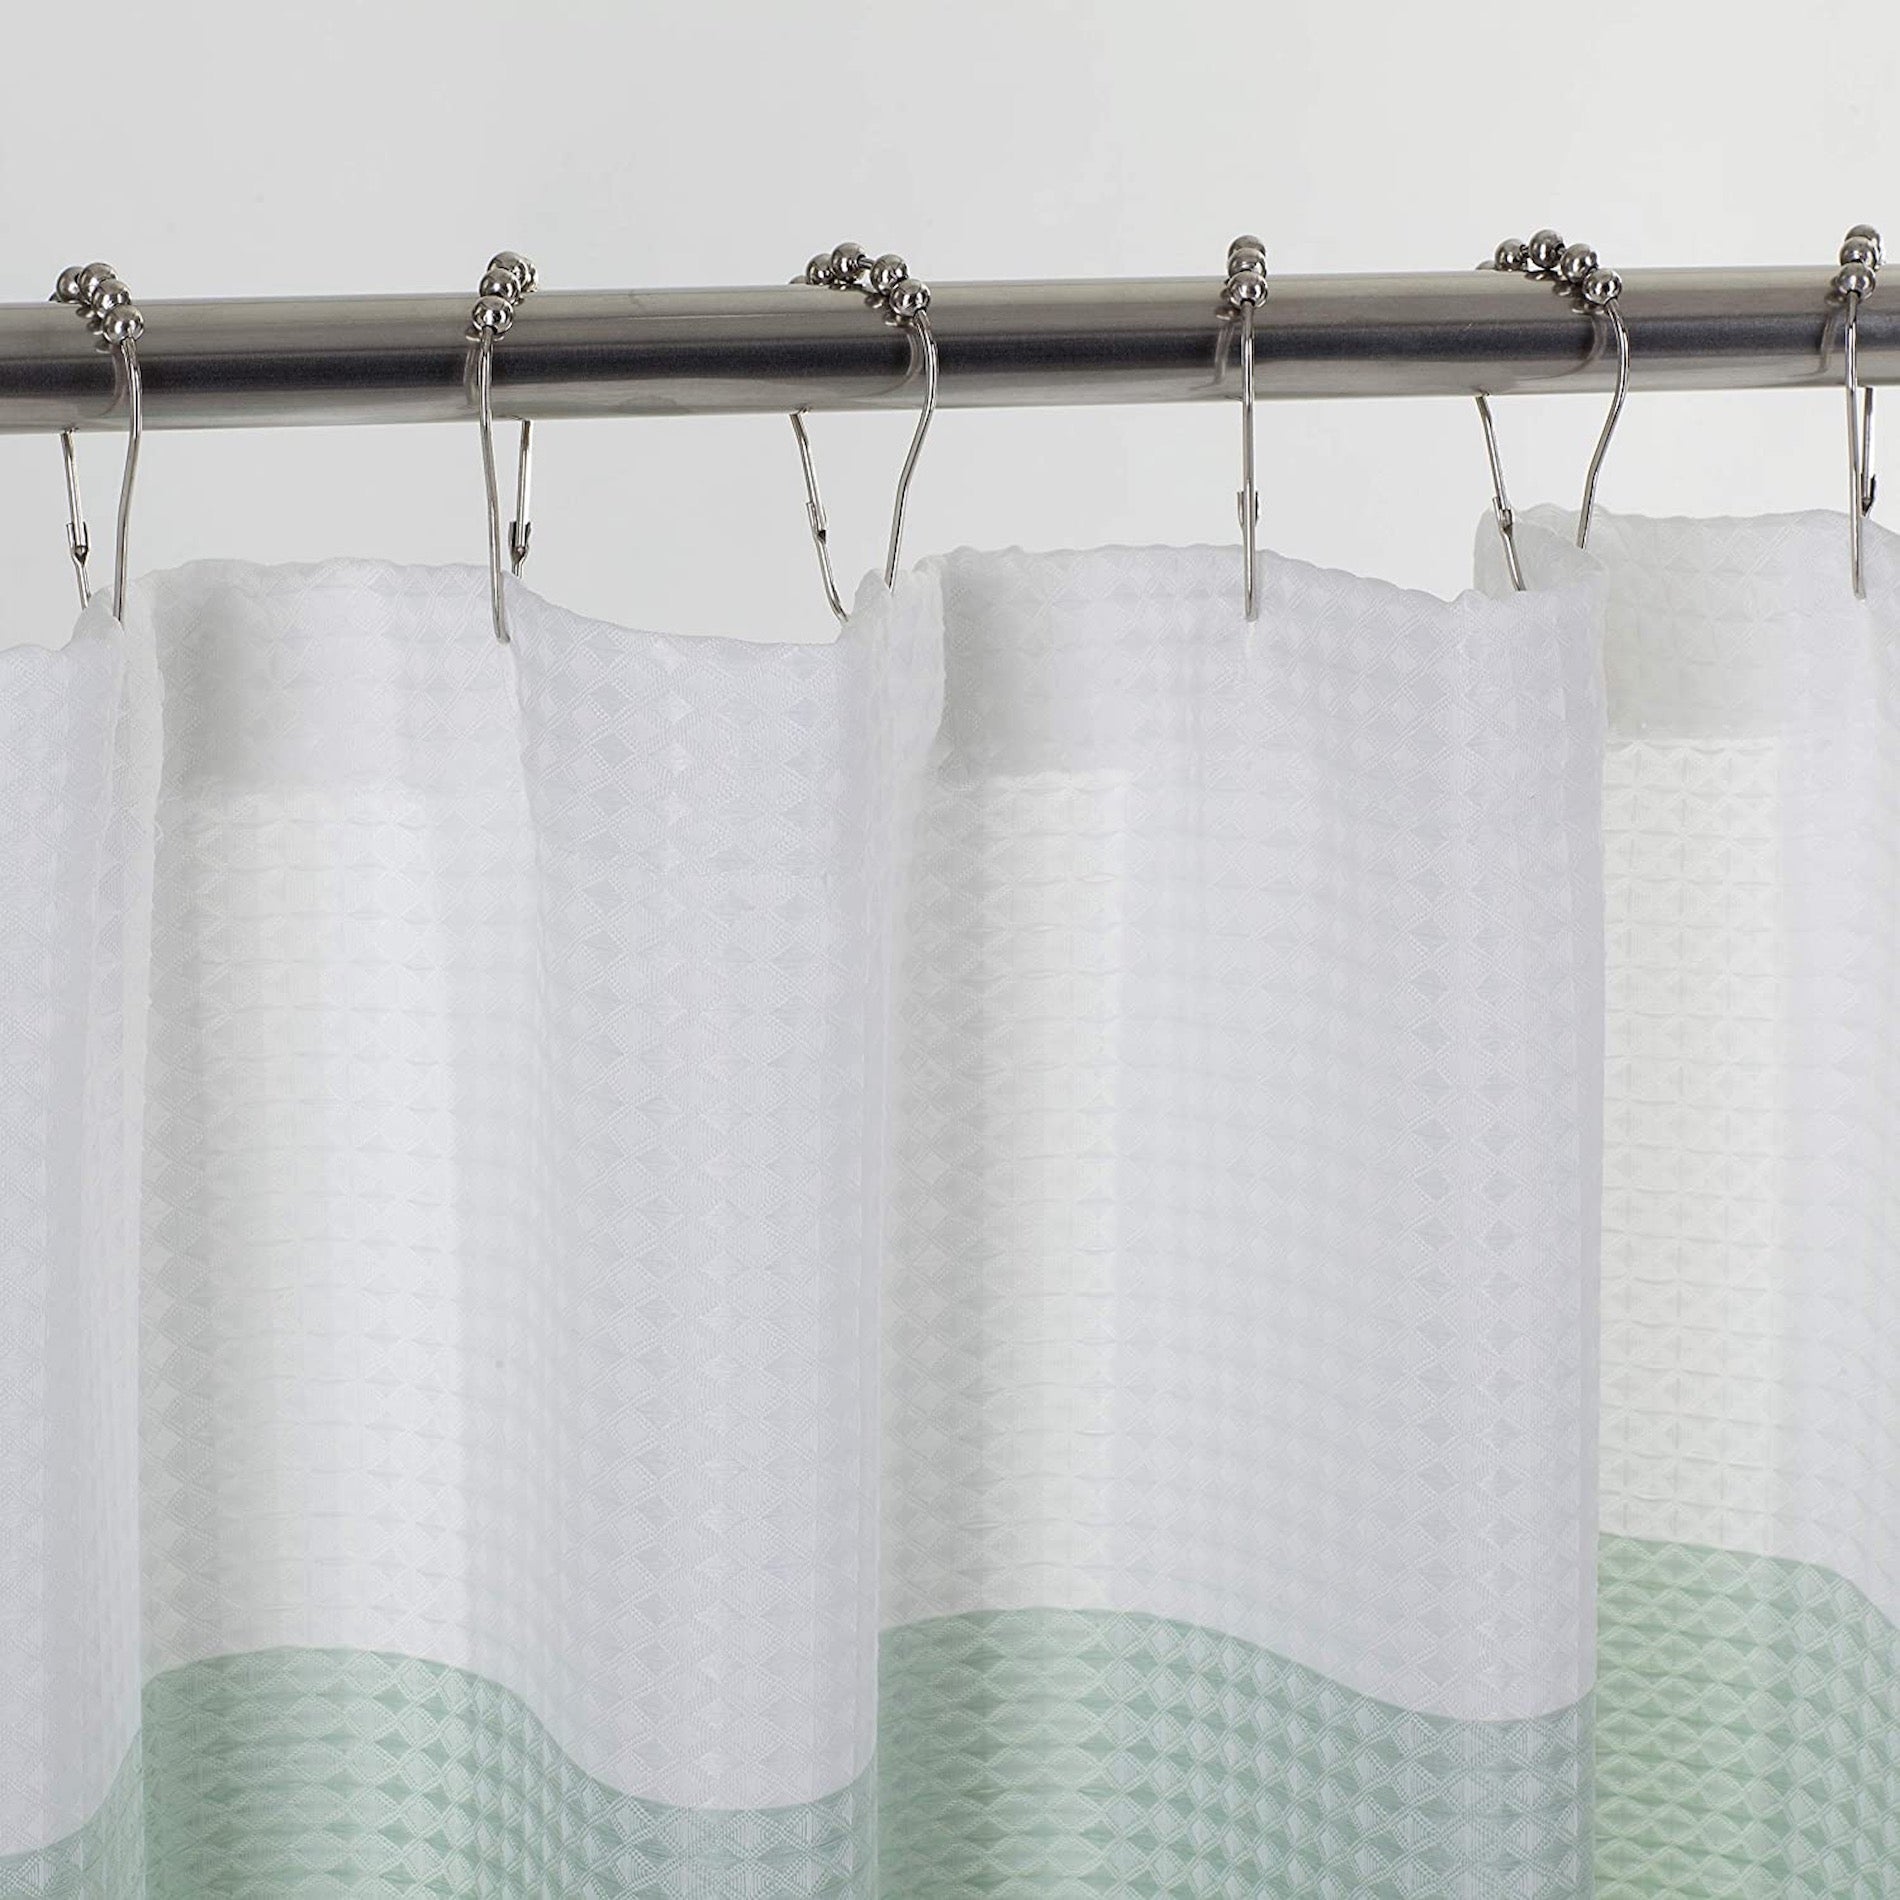 Dainty Home Ombre Waffle 13 Piece Set 3D Striped Ombre Design Shower Curtain with 12 Roller Ball Hooks Included